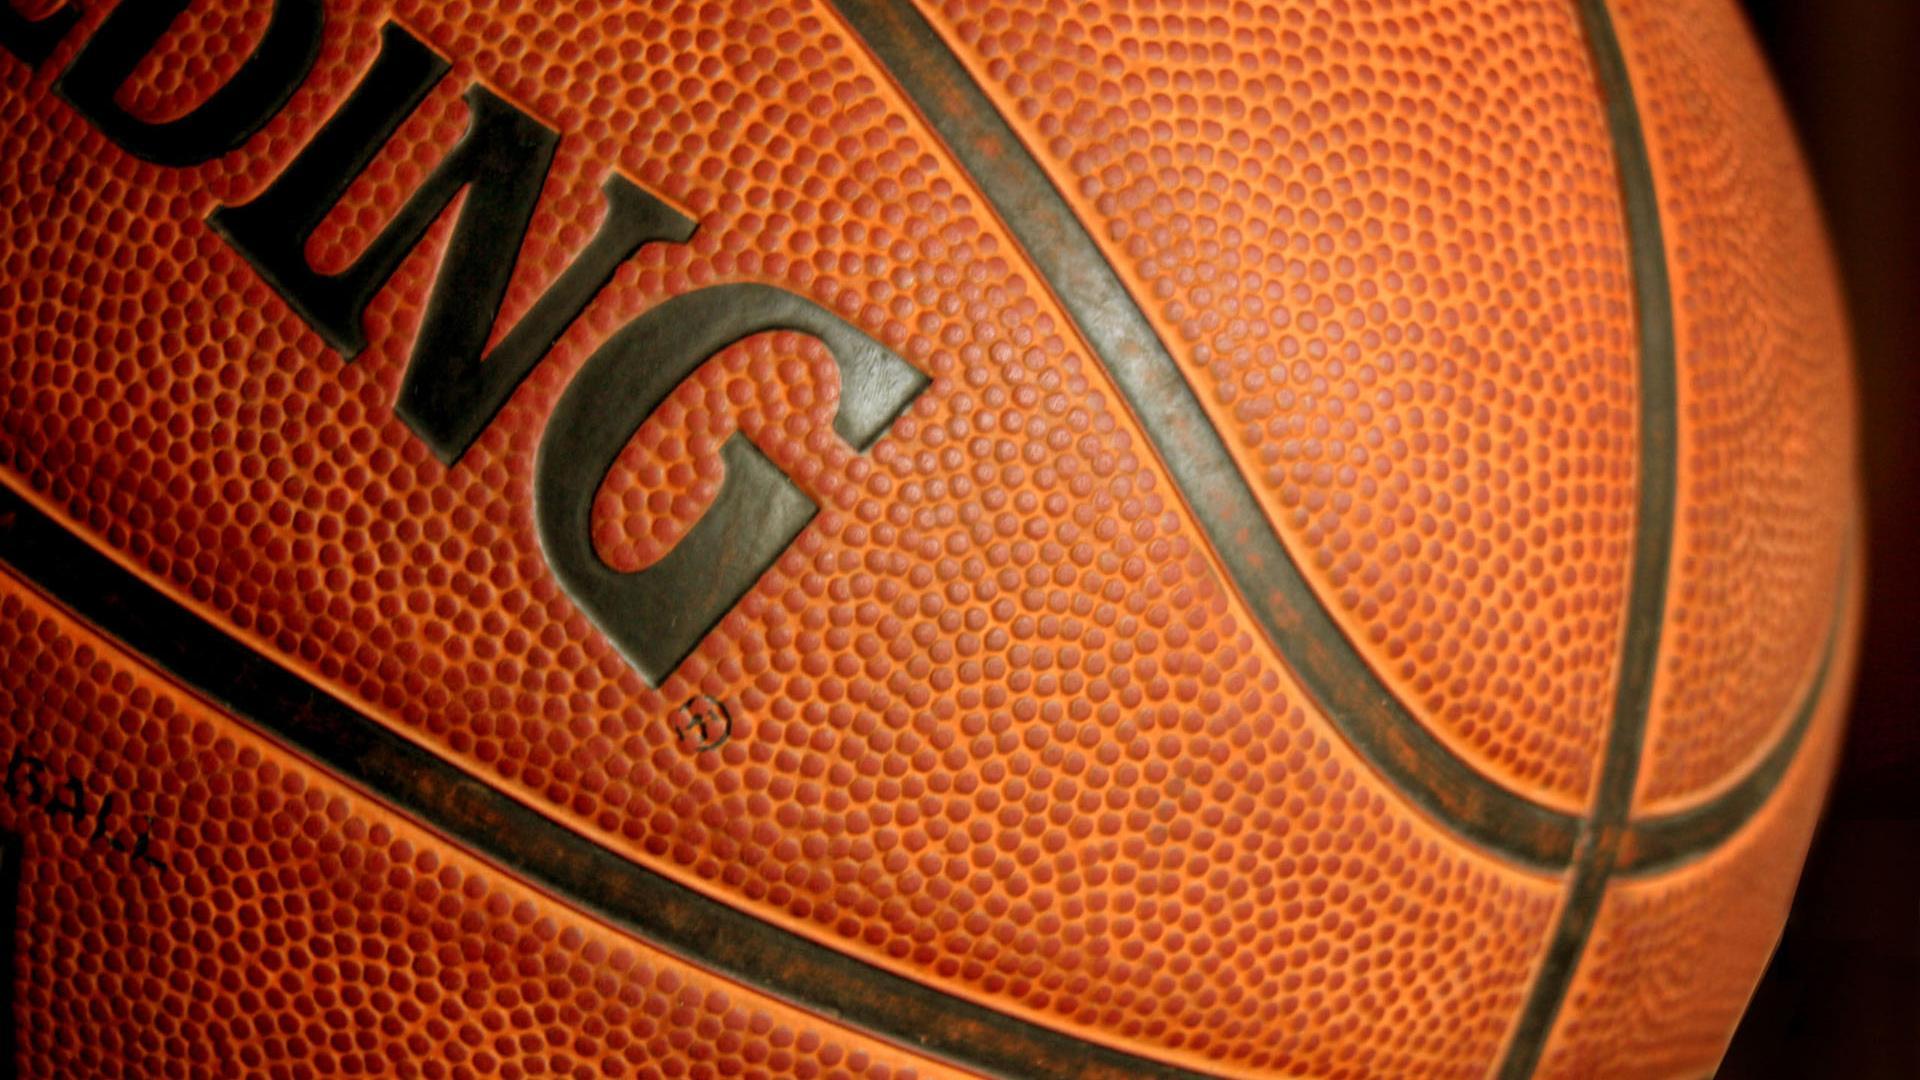  basketball wallpapers for computer for free basketball wallpapers